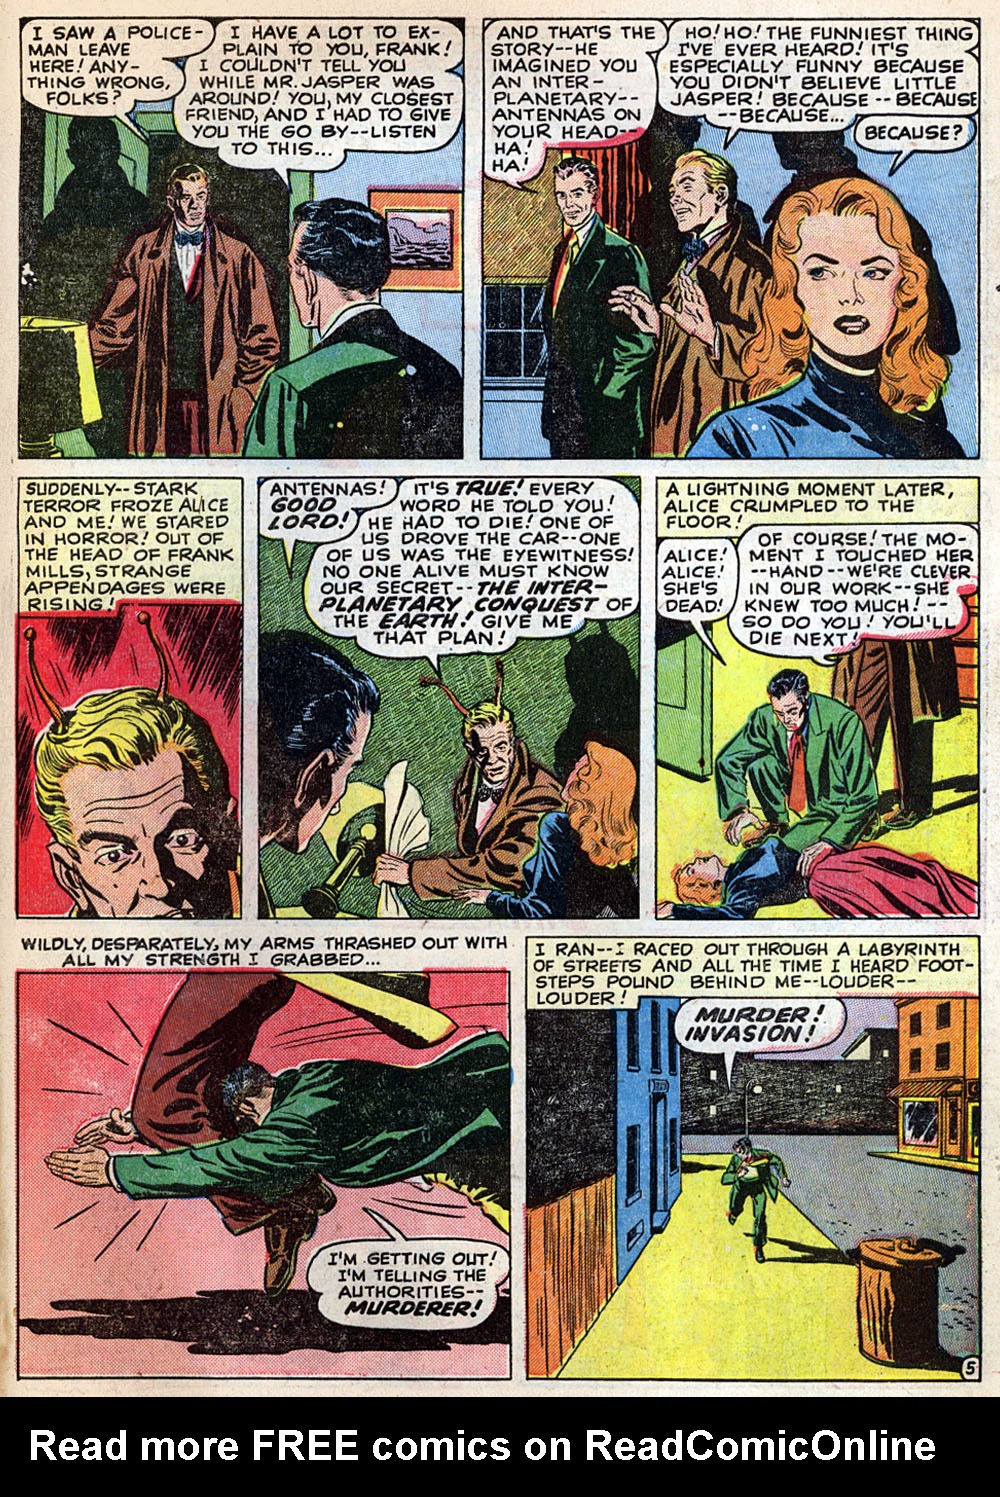 Marvel Tales (1949) 101 Page 30